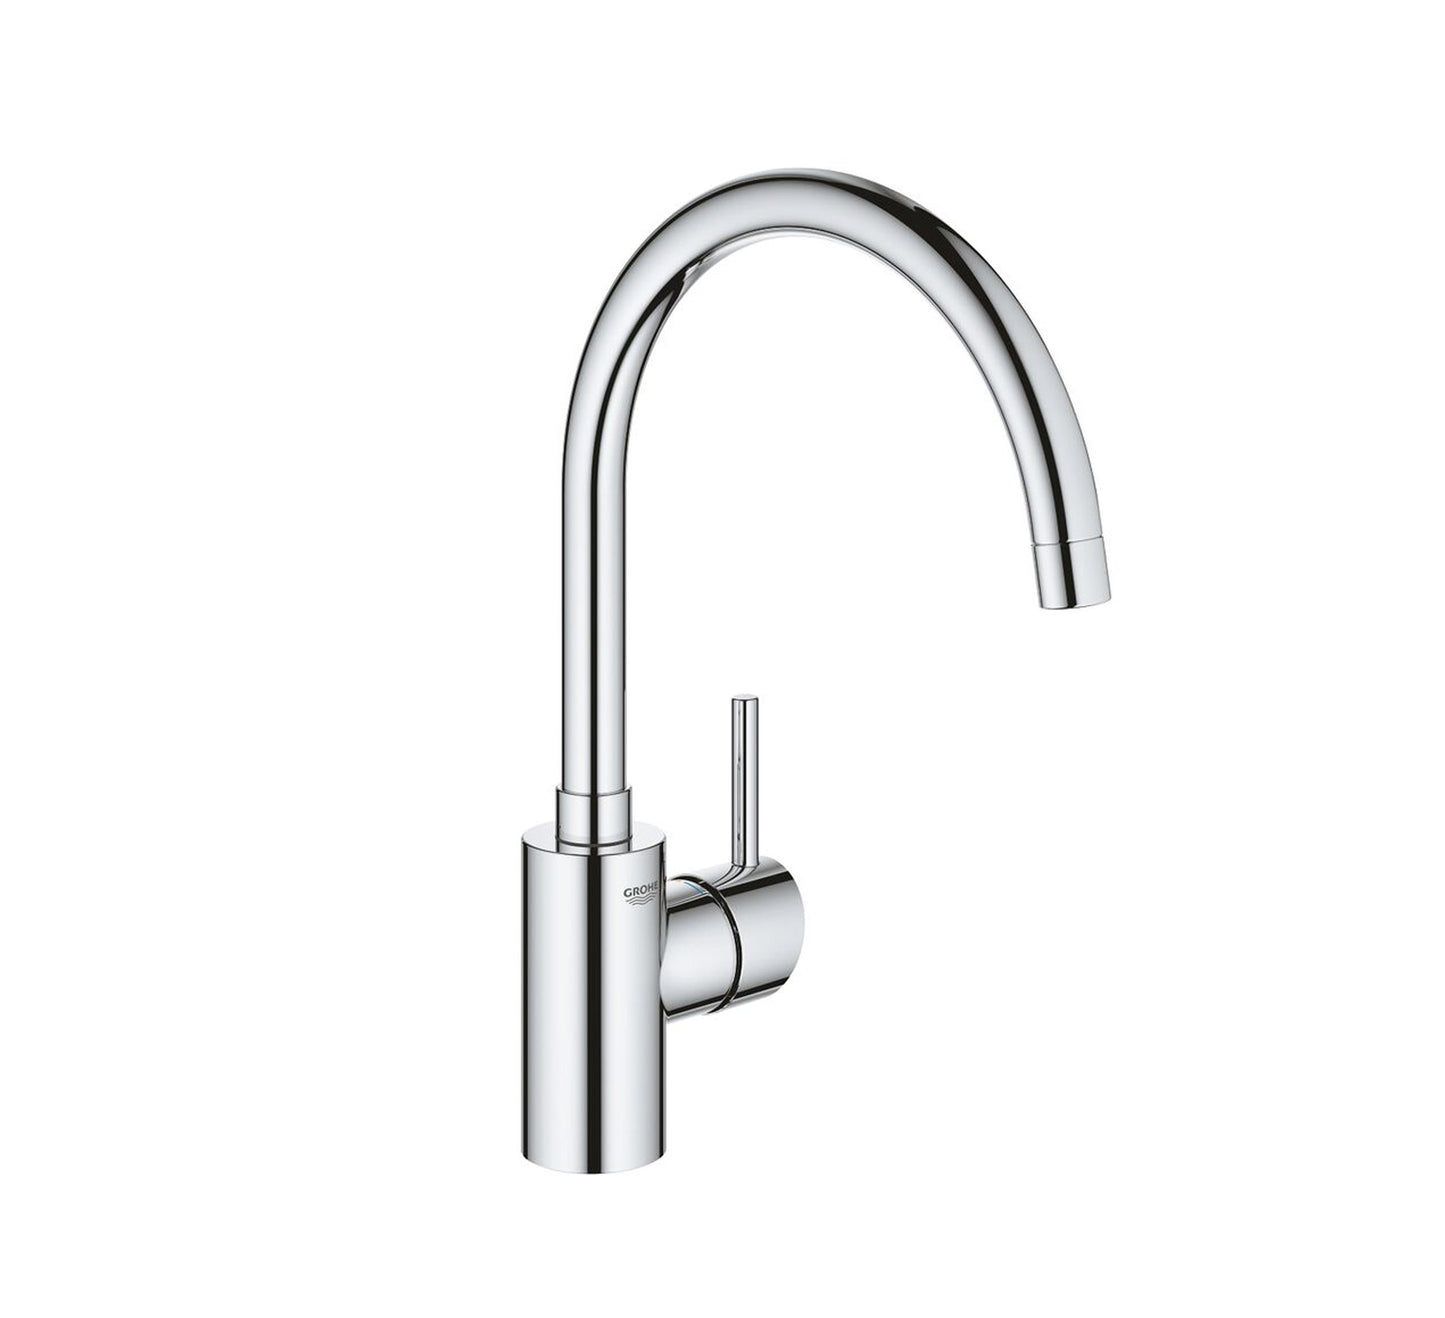 GROHE CONCETTO SINK MIXER C SPOUT - 32661003 - Tadmur Trading